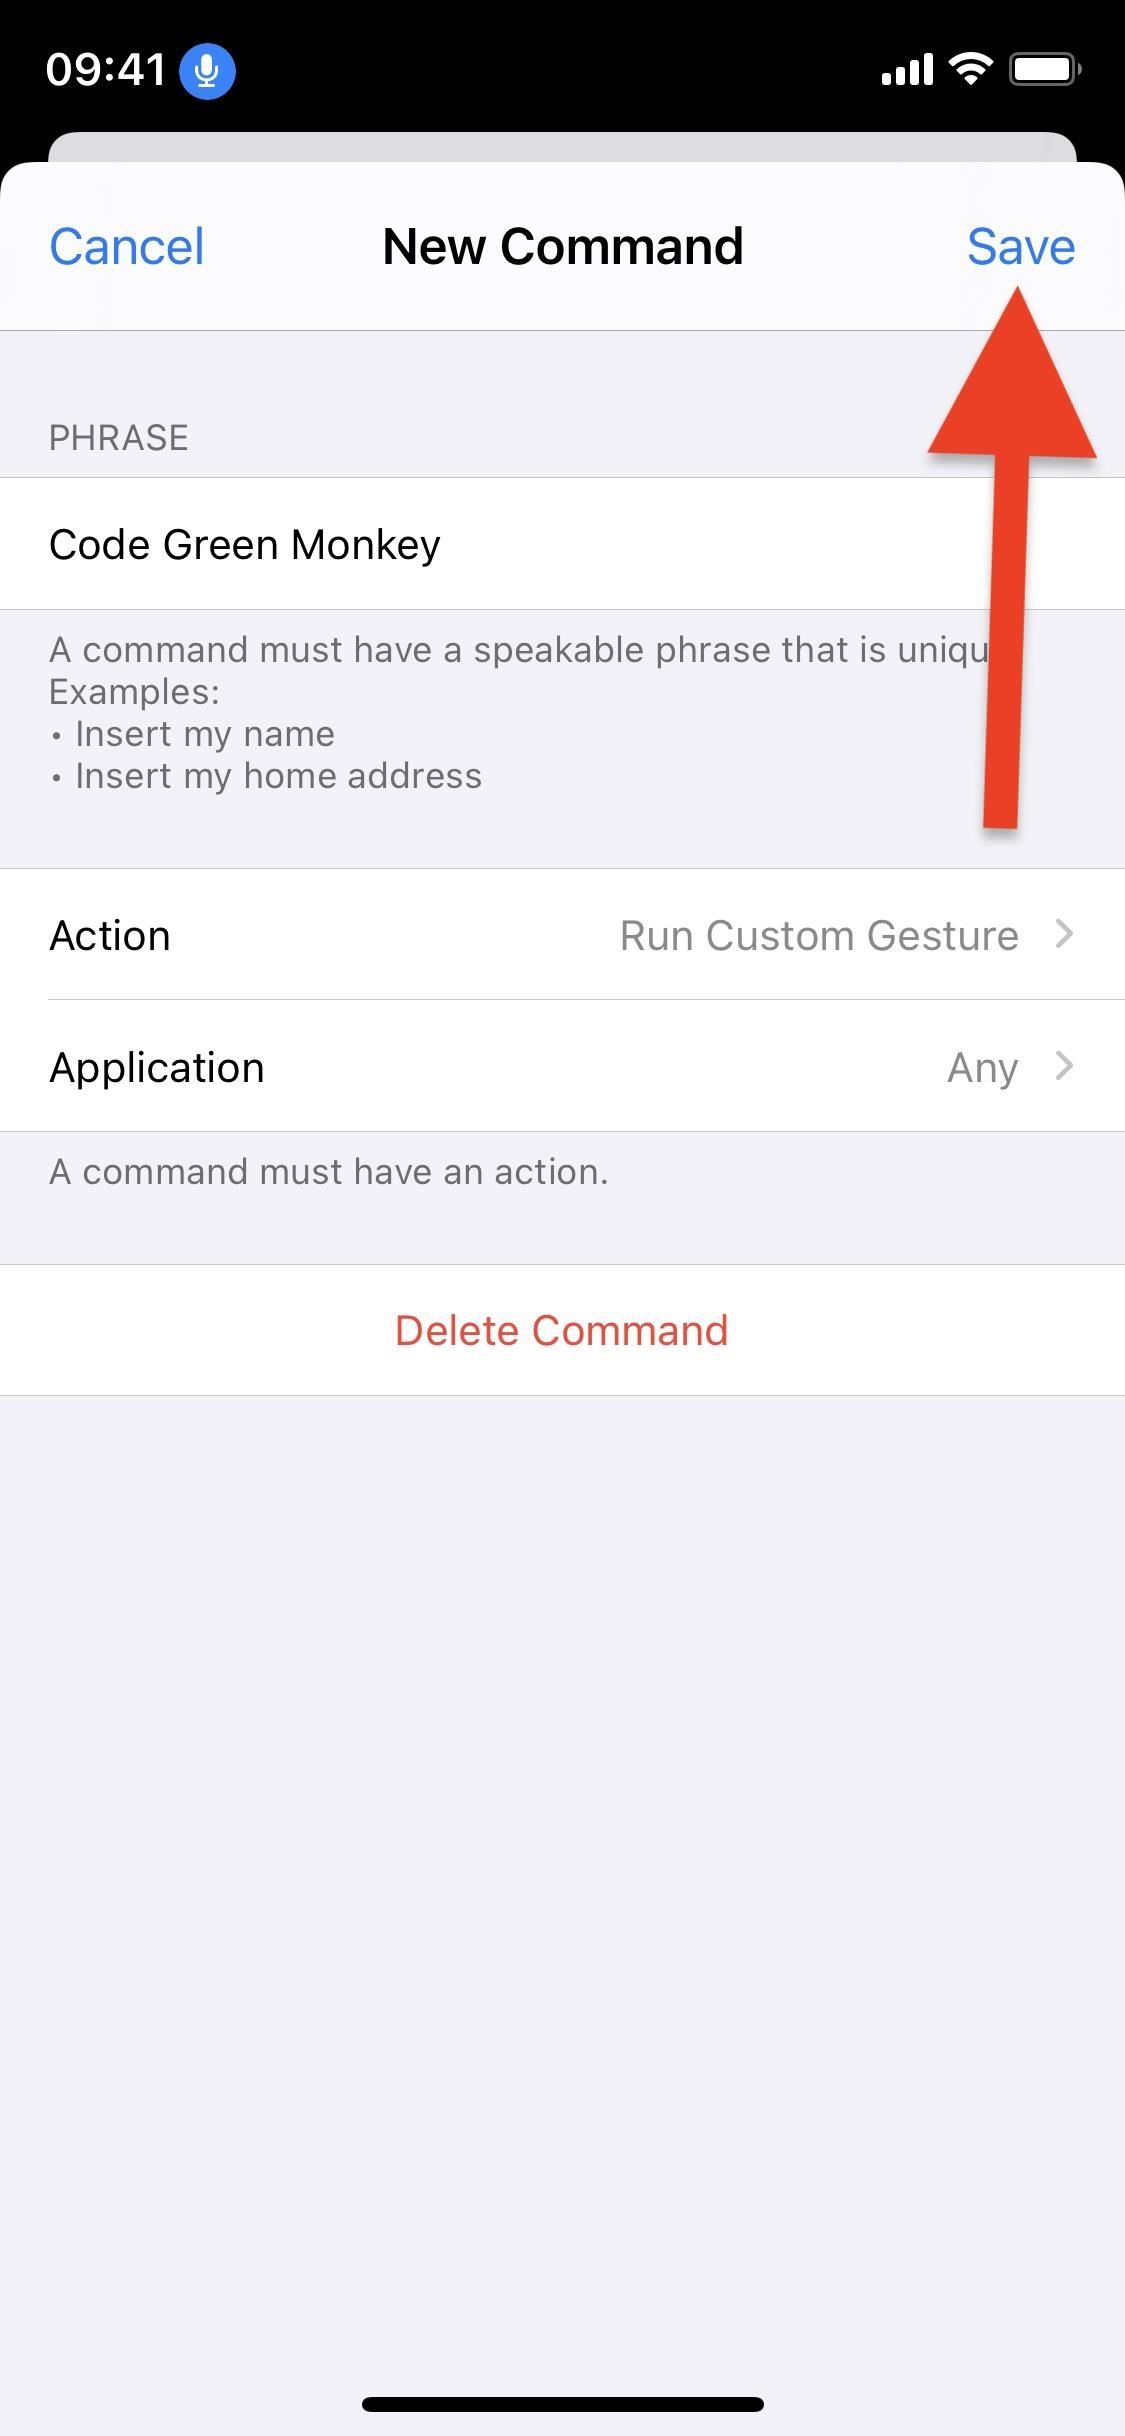 Use a Secret Voice Command to Unlock Your iPhone